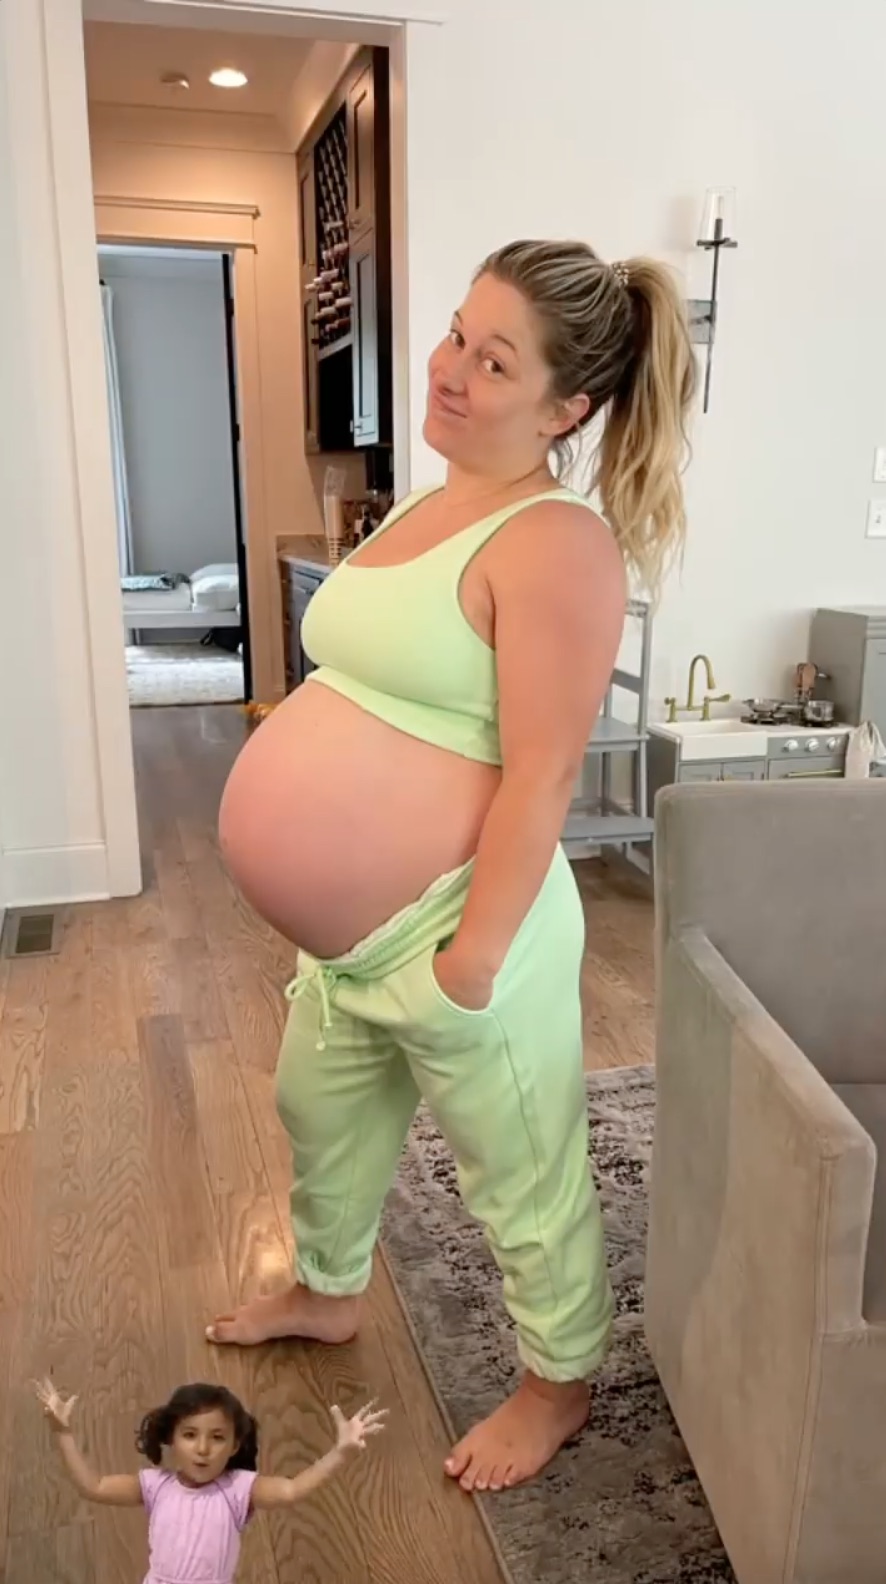 Bare Bump! See Shawn Johnson's Pregnancy Pics Ahead of 2nd Child